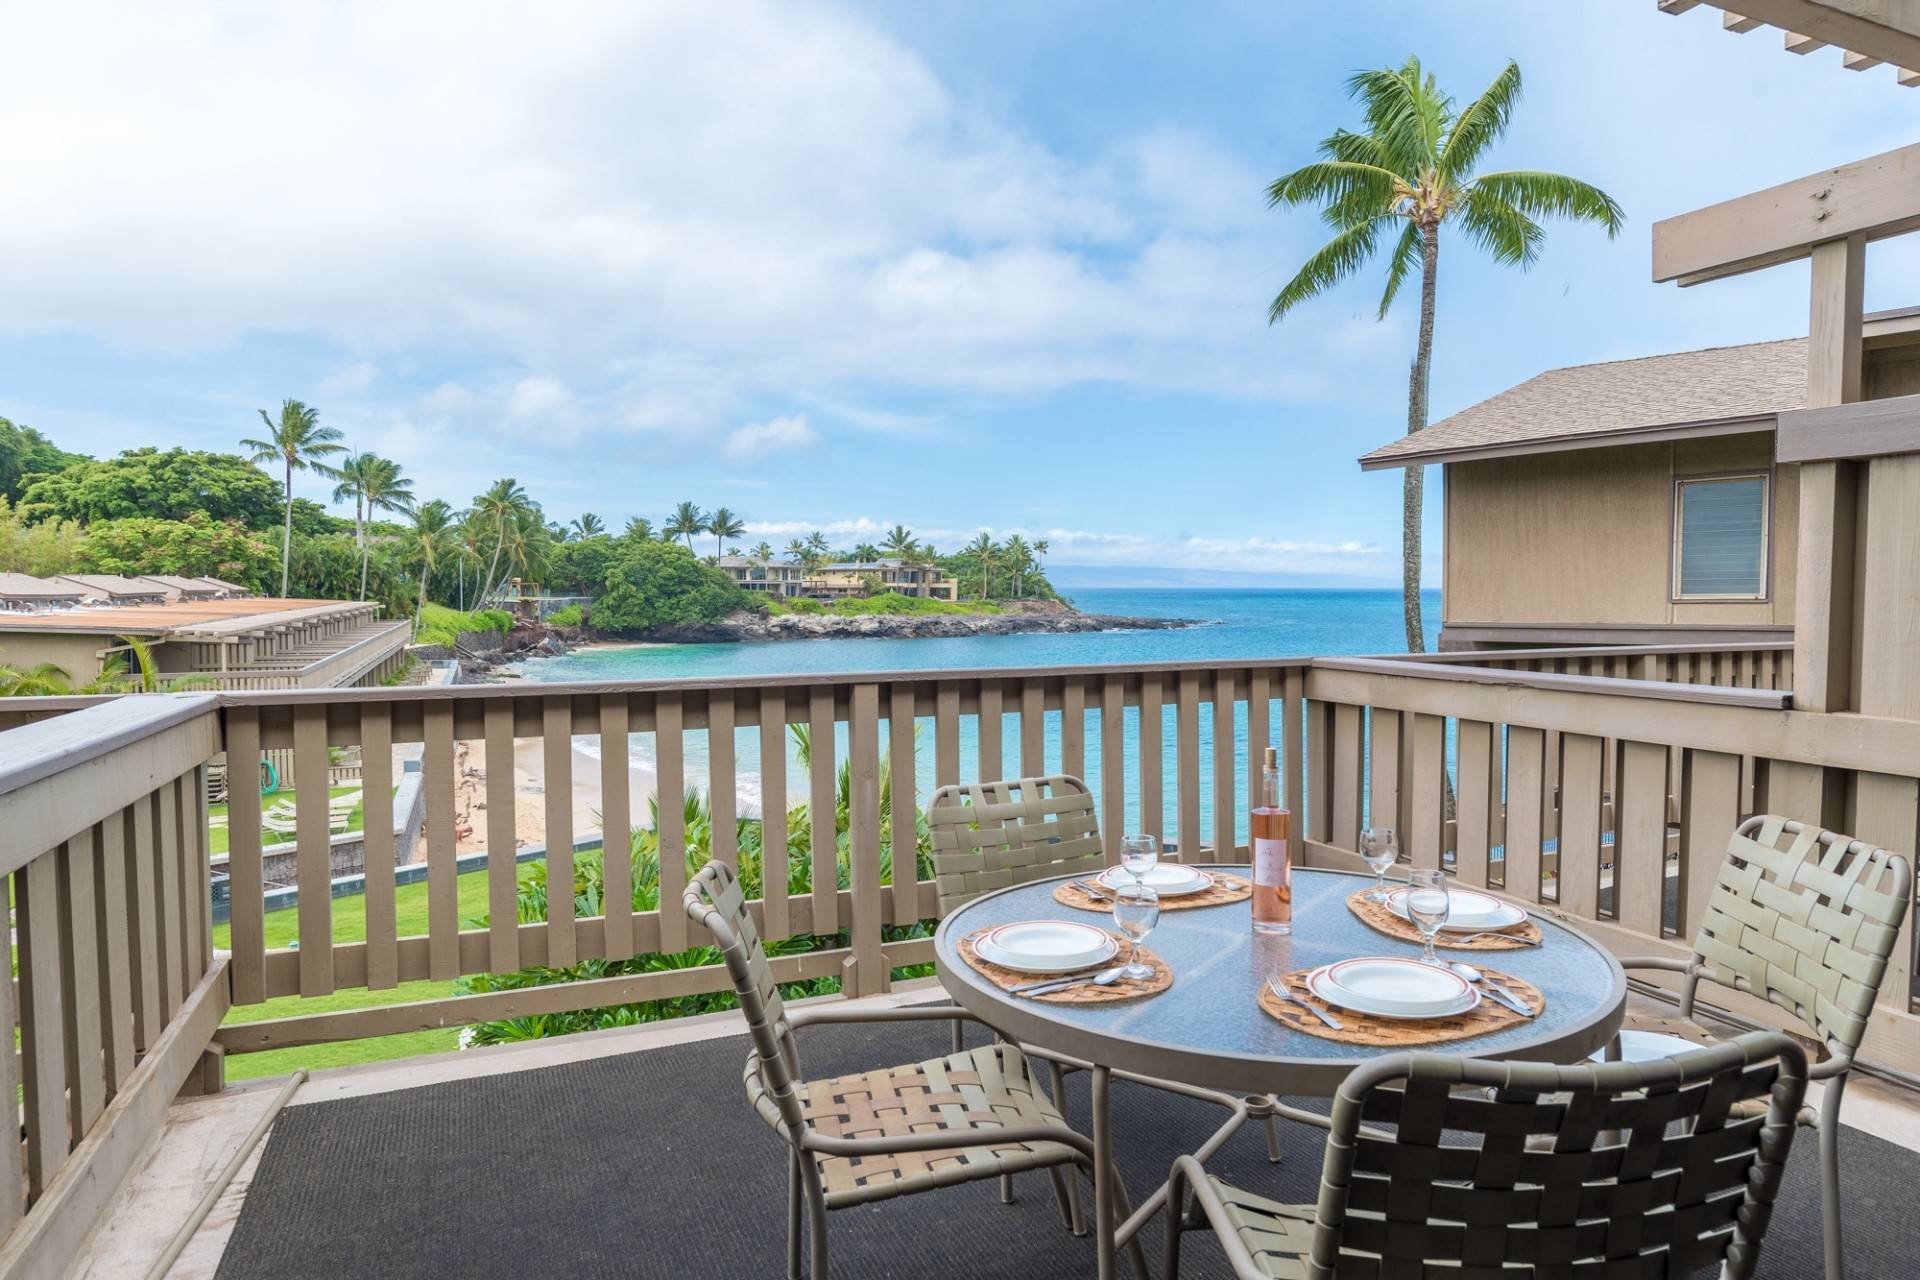 Property Image 2 - Kahana Sunset B10 - Ocean Views - Complimentary Activities - Swim, Snorkel & Sunsets included!